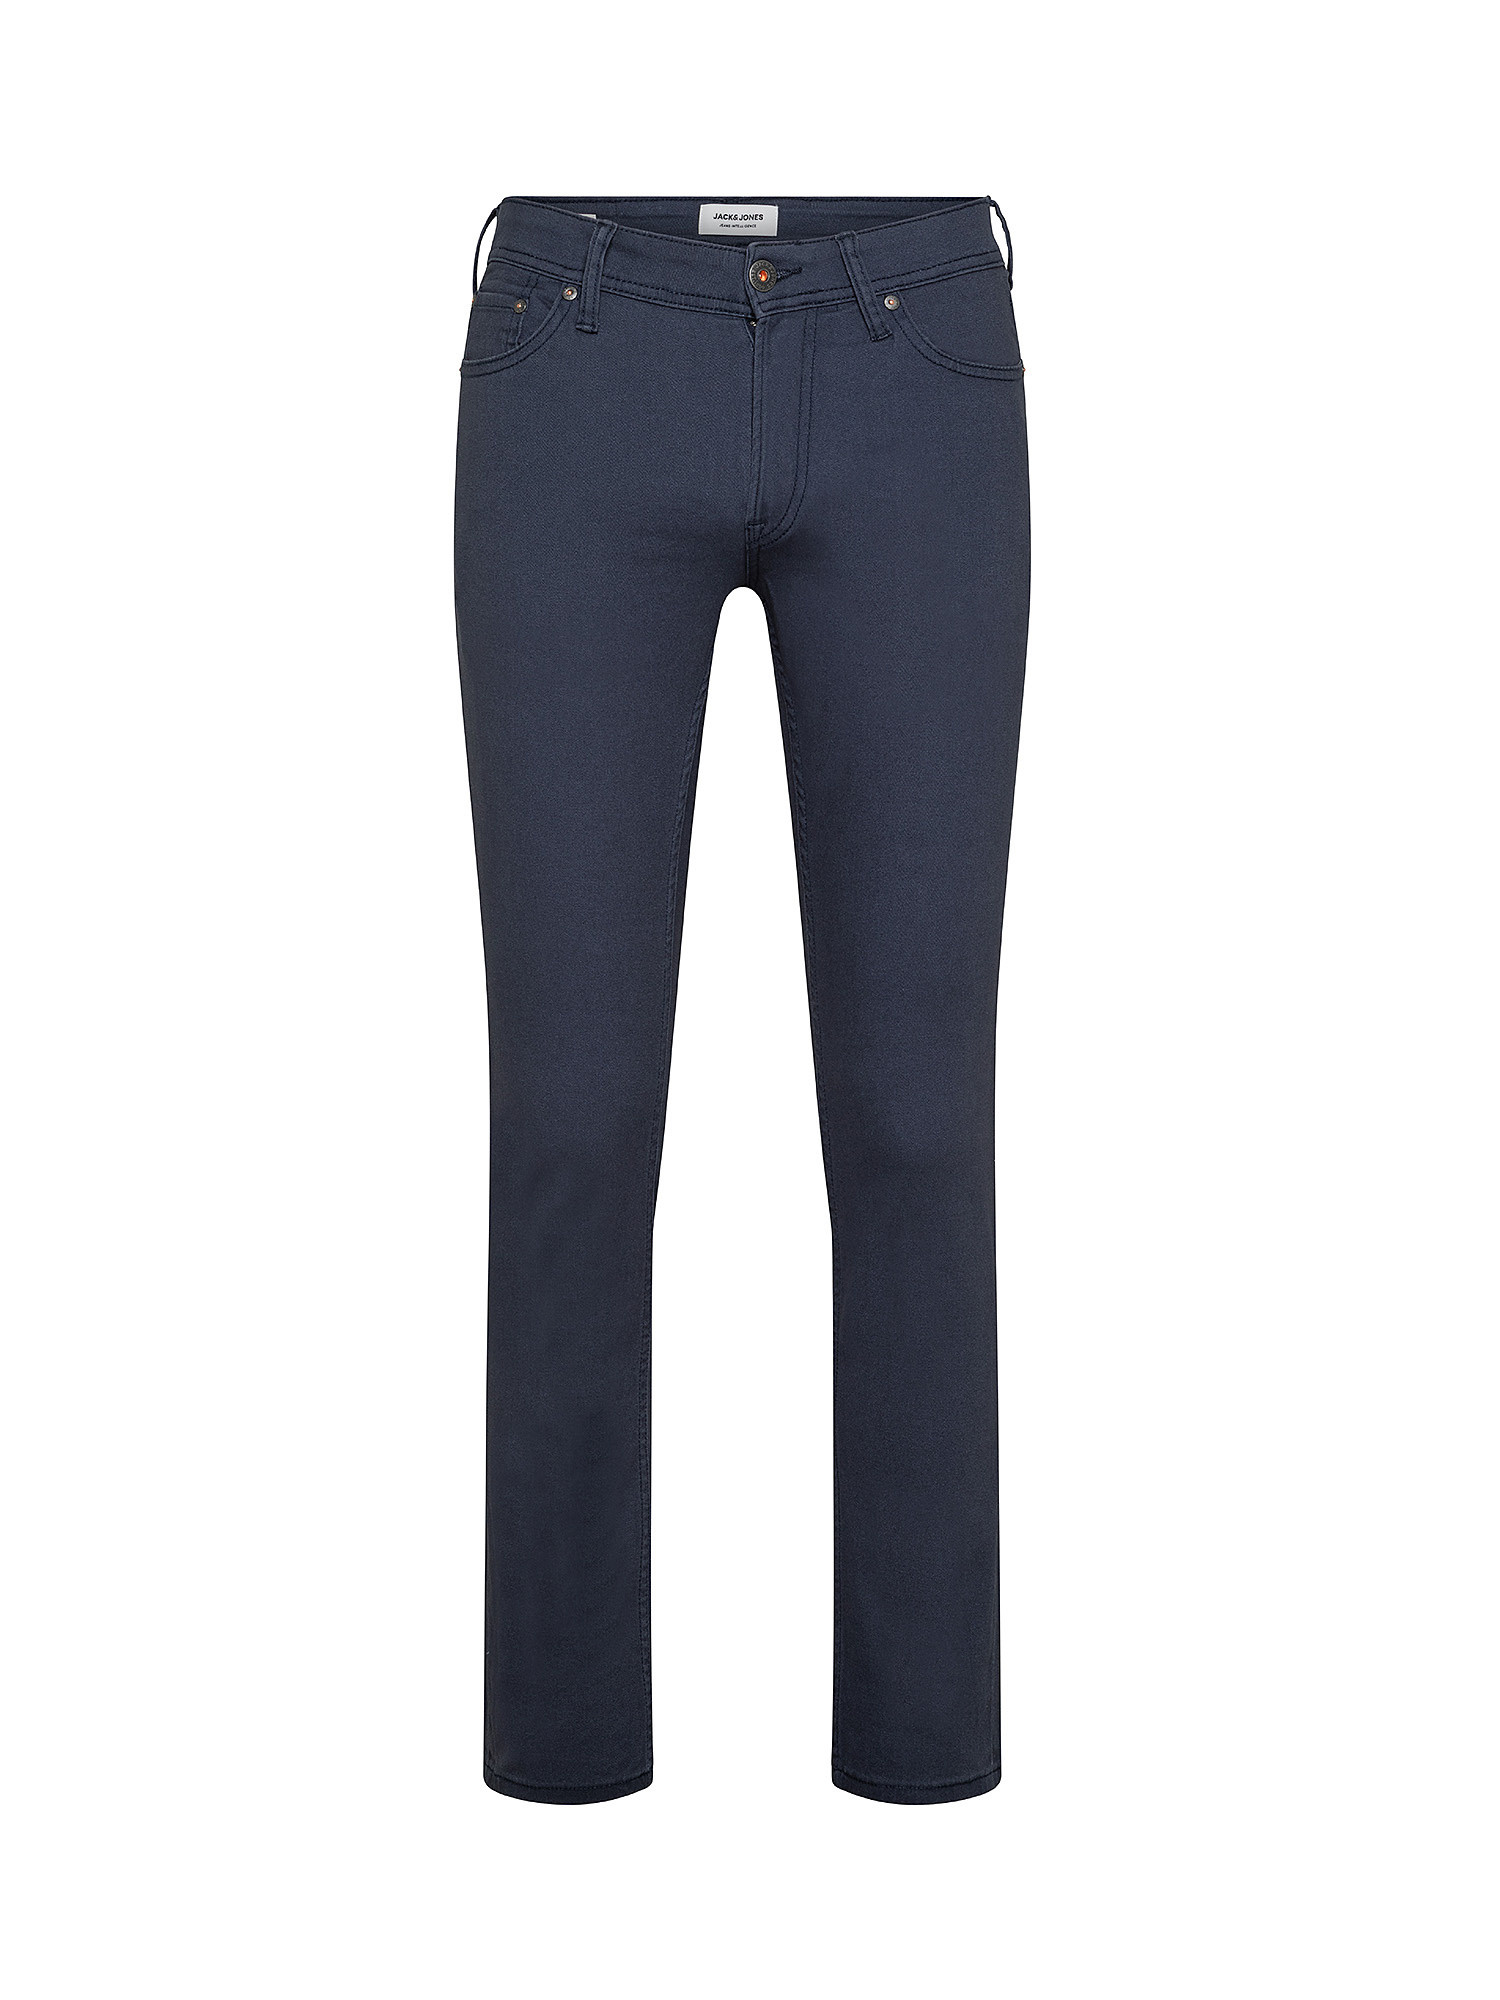 Trousers, Dark Blue, large image number 0